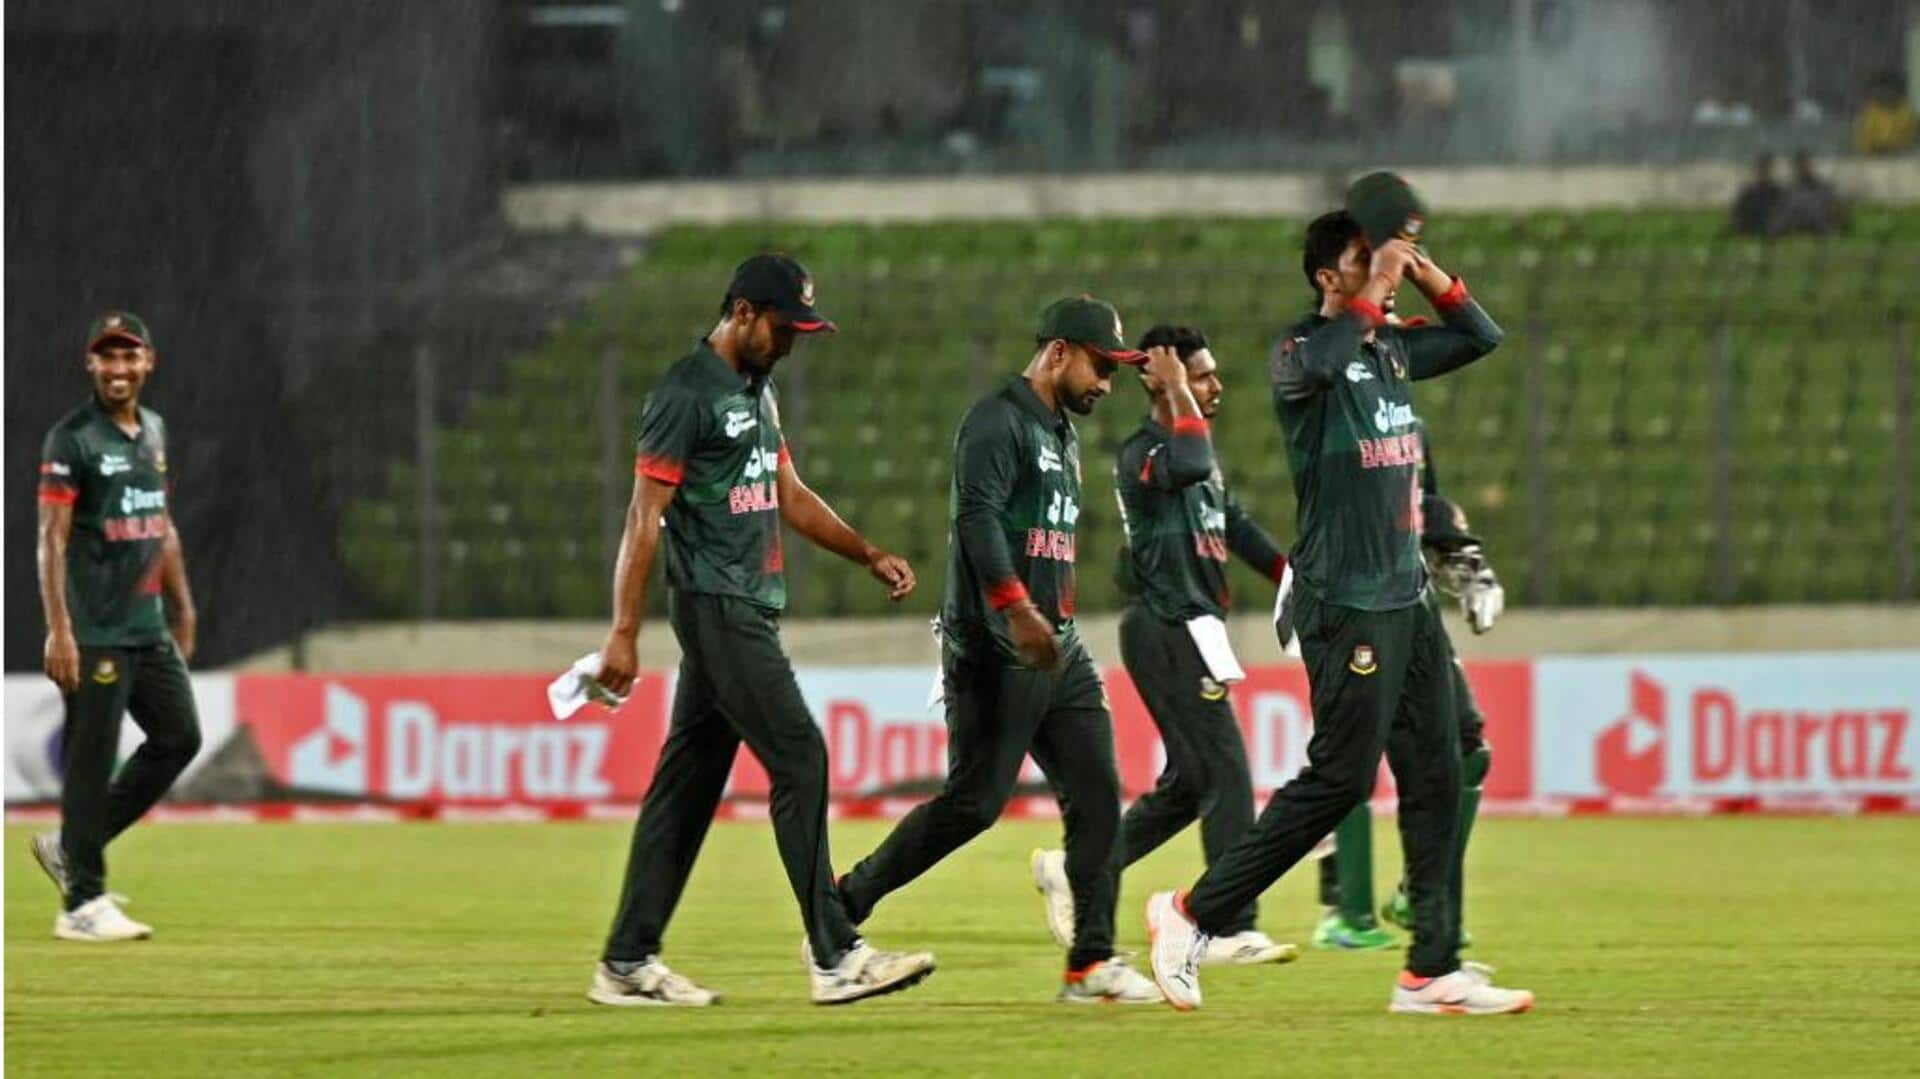 Bangladesh vs New Zealand, 2nd ODI: Preview, stats, and Dream11